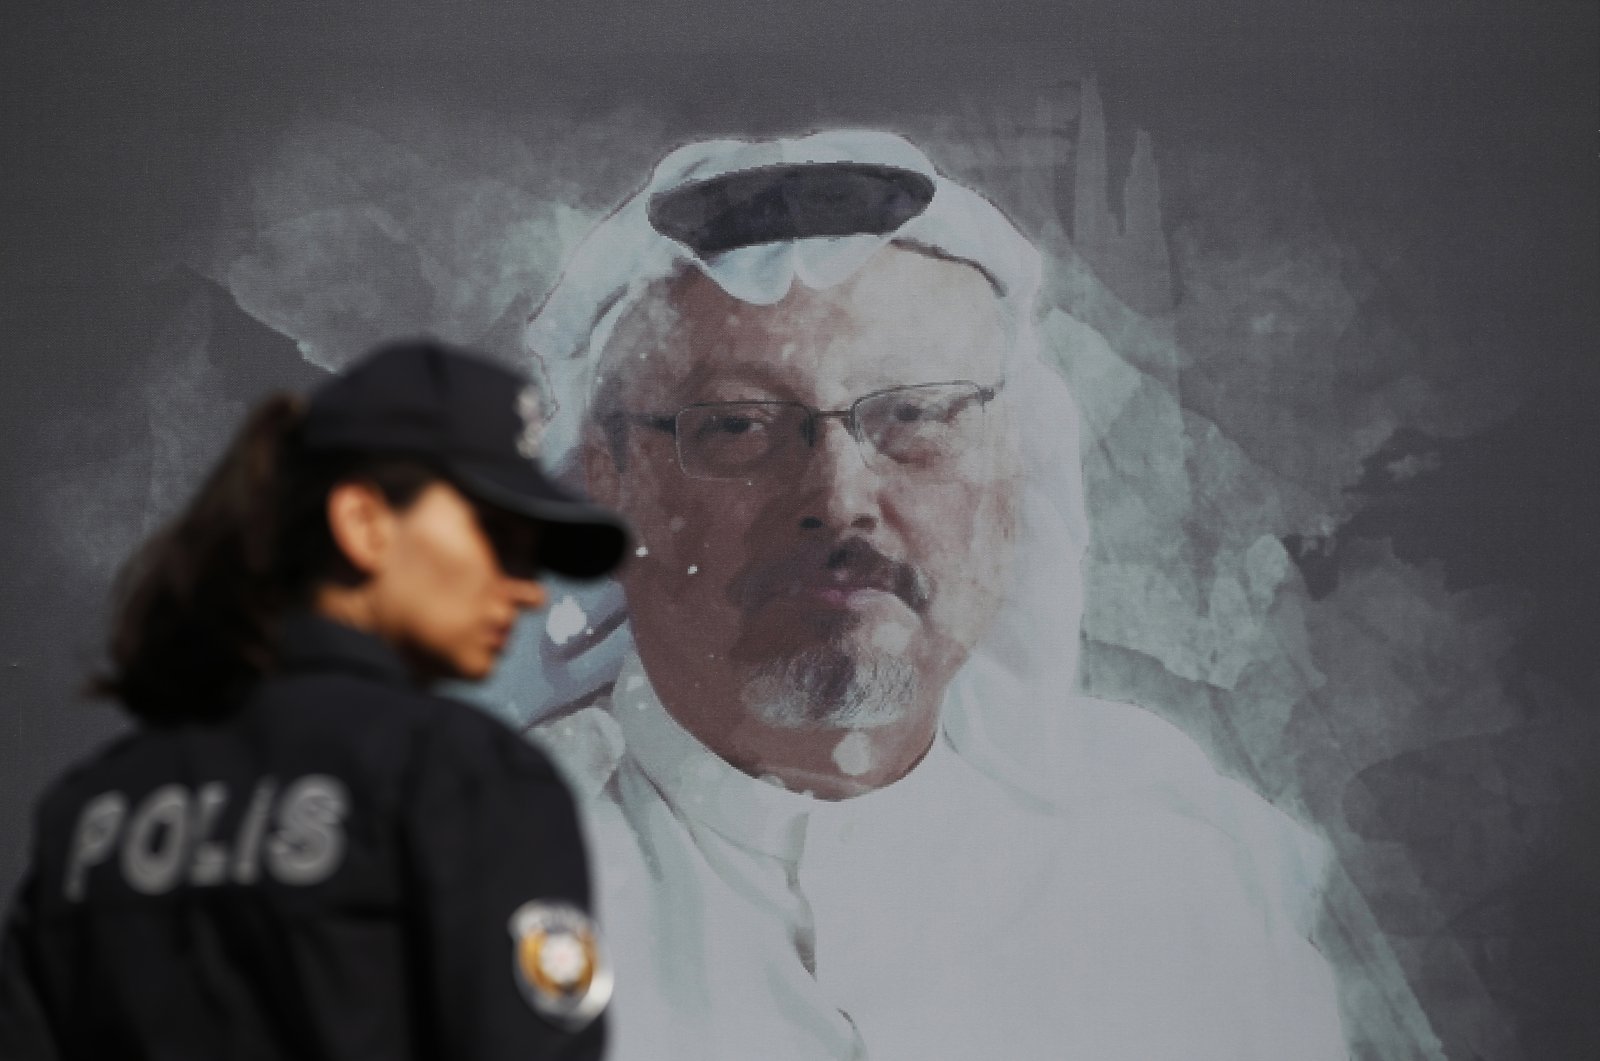 A Turkish police officer walks past a picture of slain Saudi journalist Jamal Khashoggi prior to a ceremony, near the Saudi Arabia consulate in Istanbul, marking the one-year anniversary of his death, Wednesday, Oct. 2, 2019. (AP Photo)